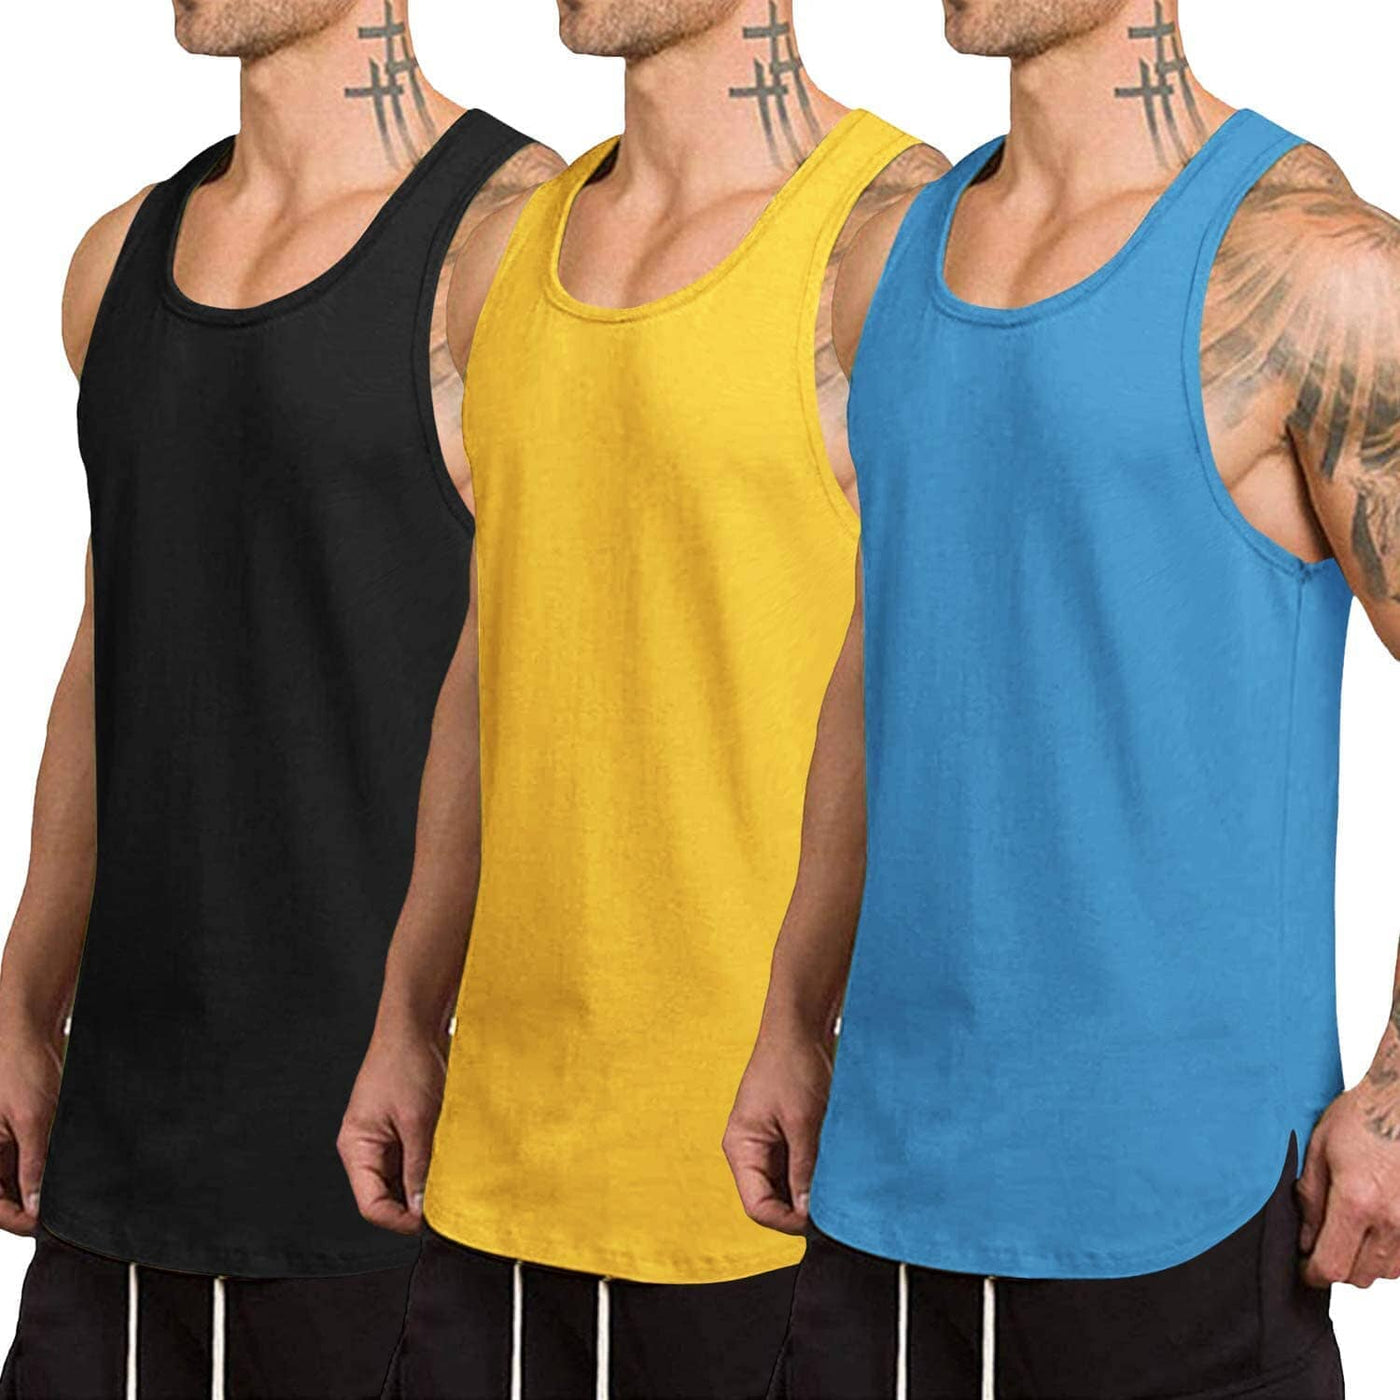 Coofandy 3-Pack Quick Dry Gym Vest (US Only) Tank Tops coofandy Black/Blue/Yellow S 